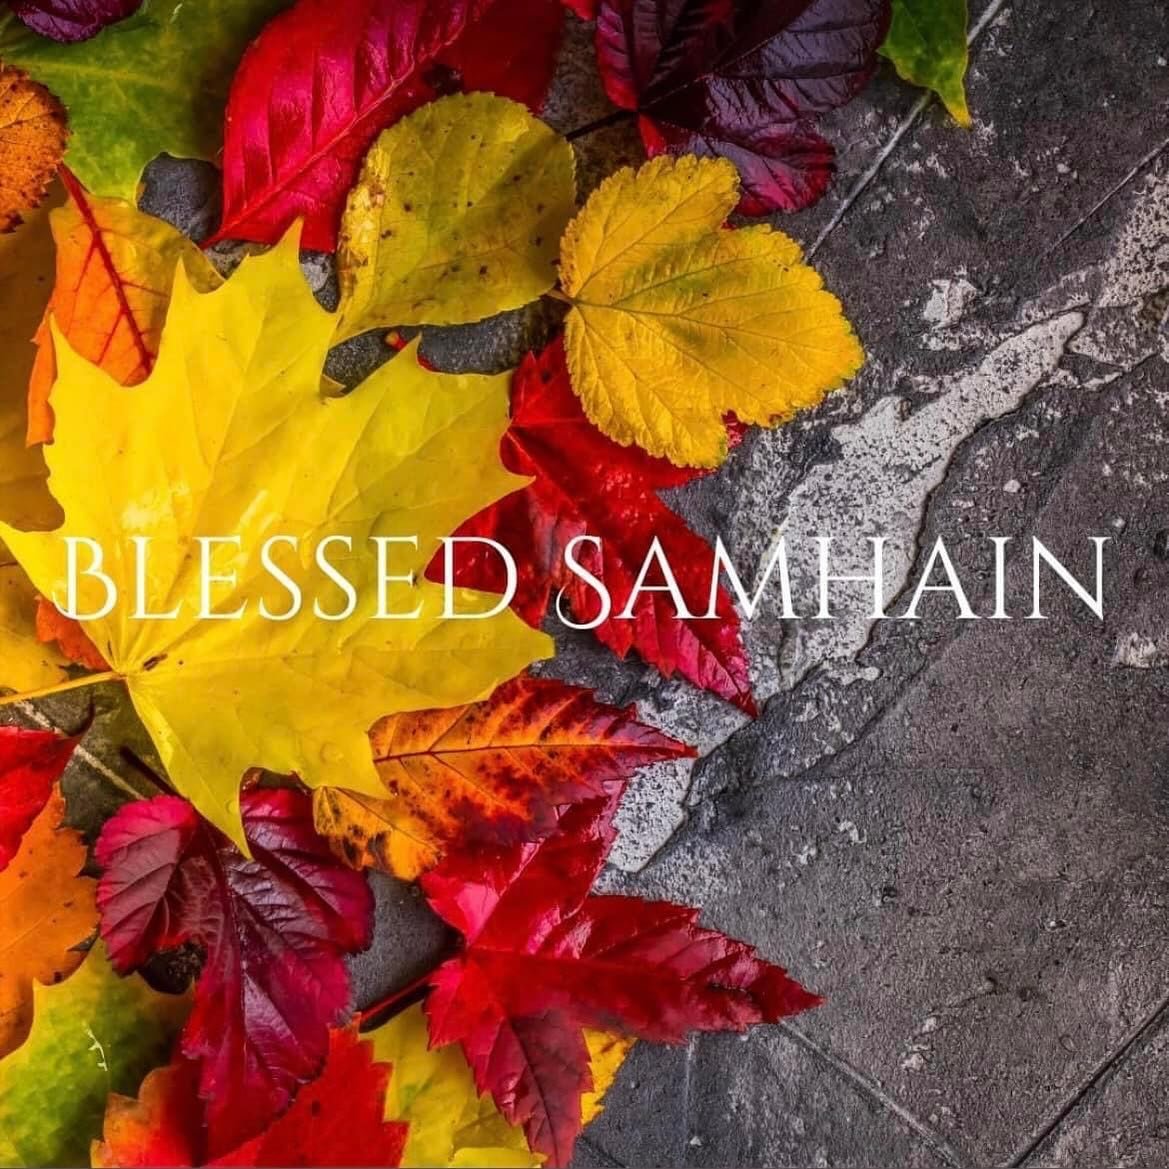 Happy New Year Witches ✨🍁

At Samhain (pronounced SA-WHEN), the veil between this world and the next is at its thinnest. It&rsquo;s the season to honour lost loved ones, set a place for them at your table, and keep a candle burning in the window to 